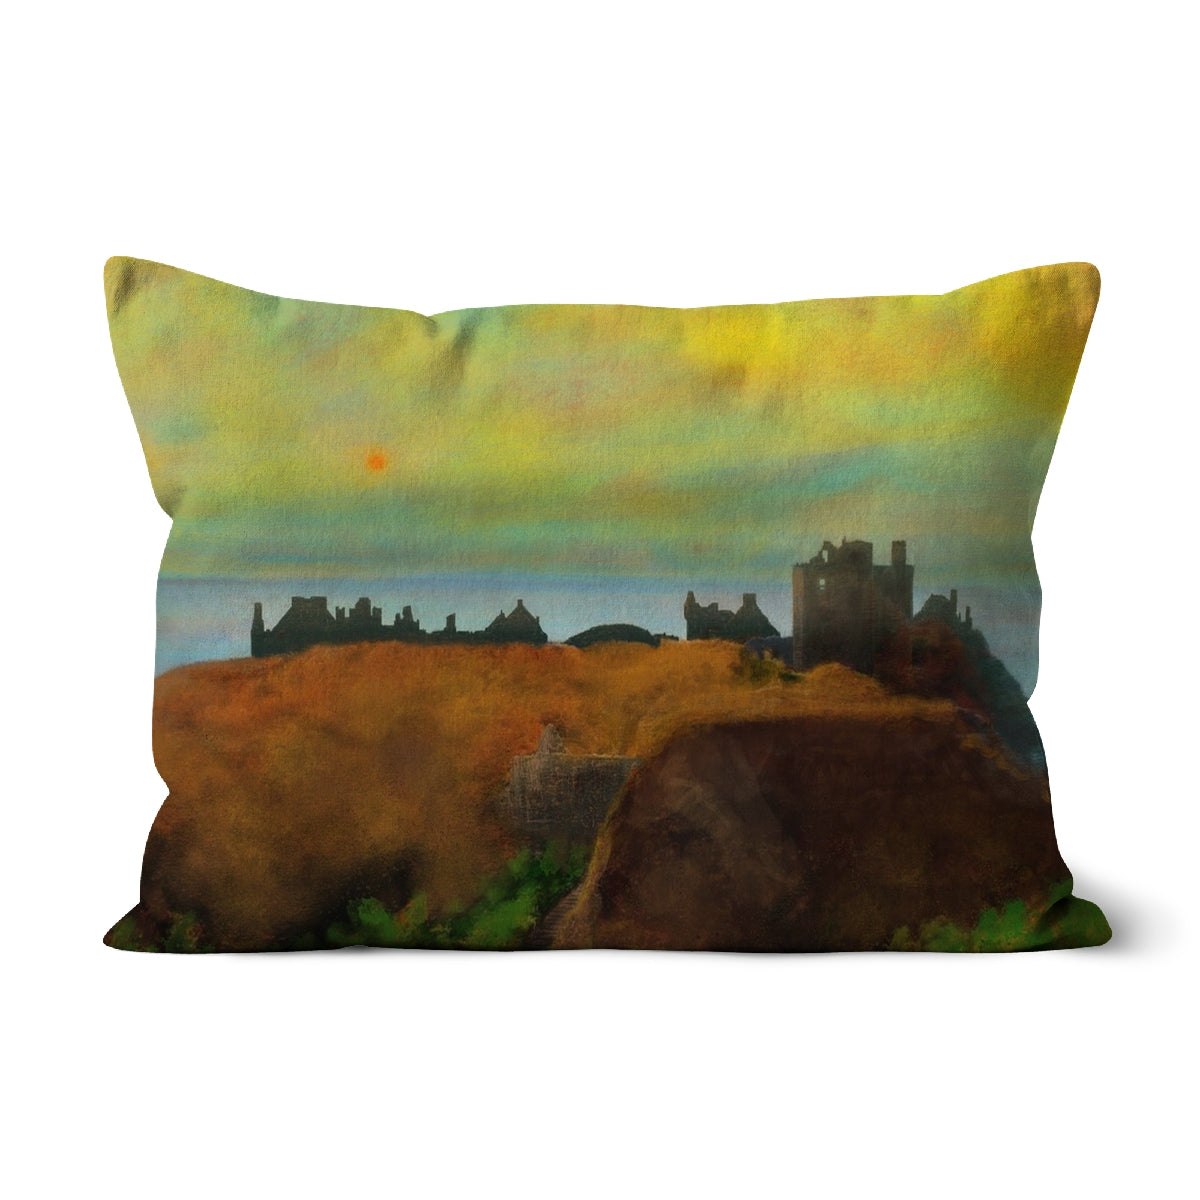 Dunnottar Castle Art Gifts Cushion-Cushions-Historic & Iconic Scotland Art Gallery-Canvas-19"x13"-Paintings, Prints, Homeware, Art Gifts From Scotland By Scottish Artist Kevin Hunter